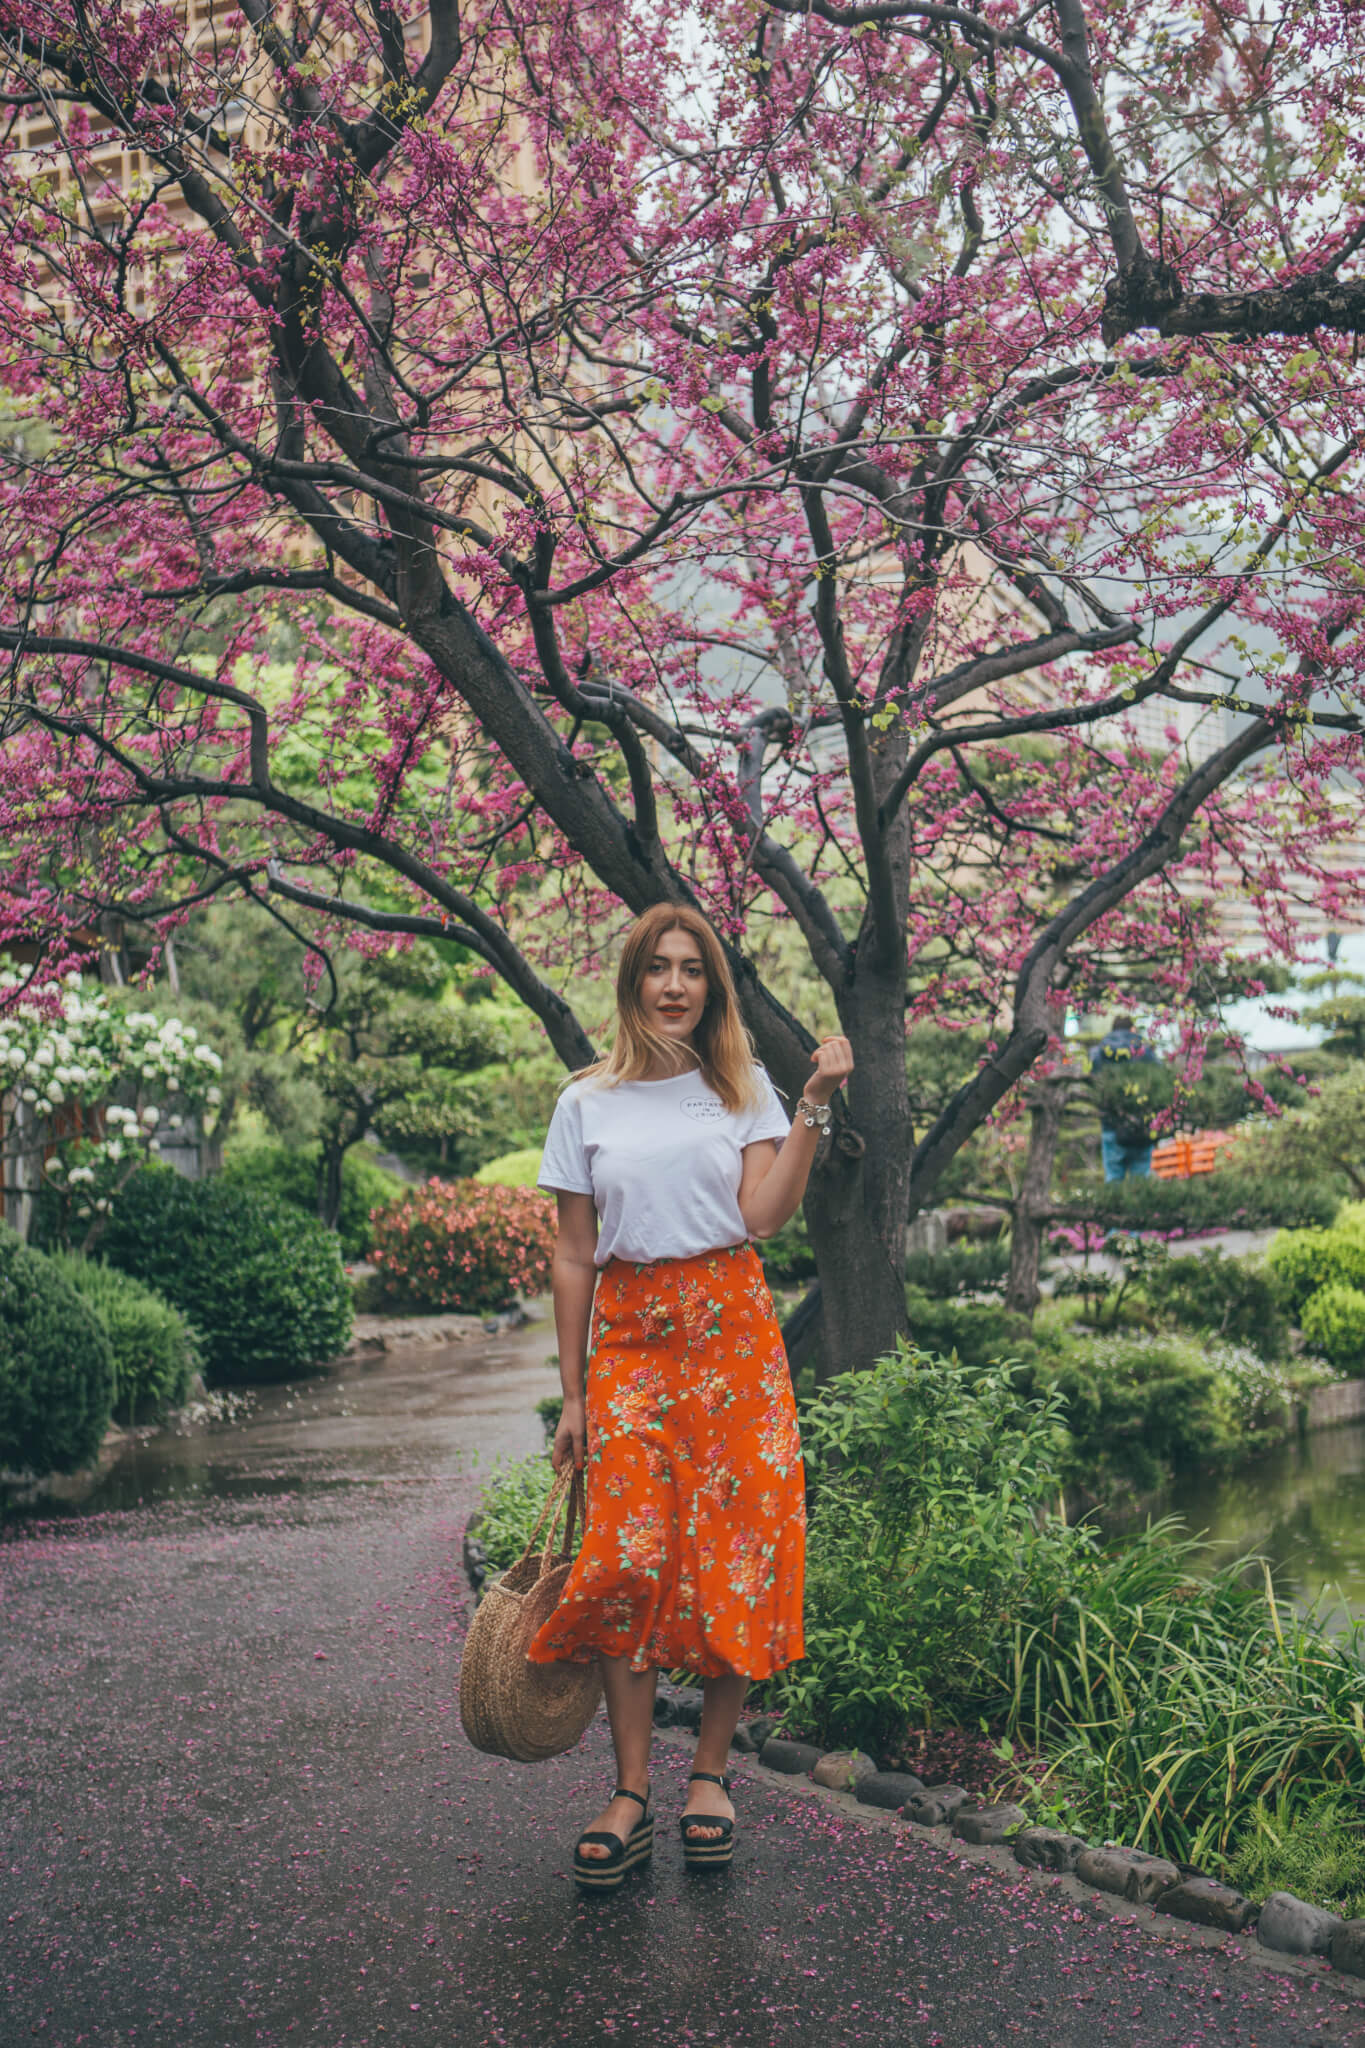 And-Other-Stories-Japanese-Garden-2-of-12-1 Japanese Garden Monaco - What I Wore